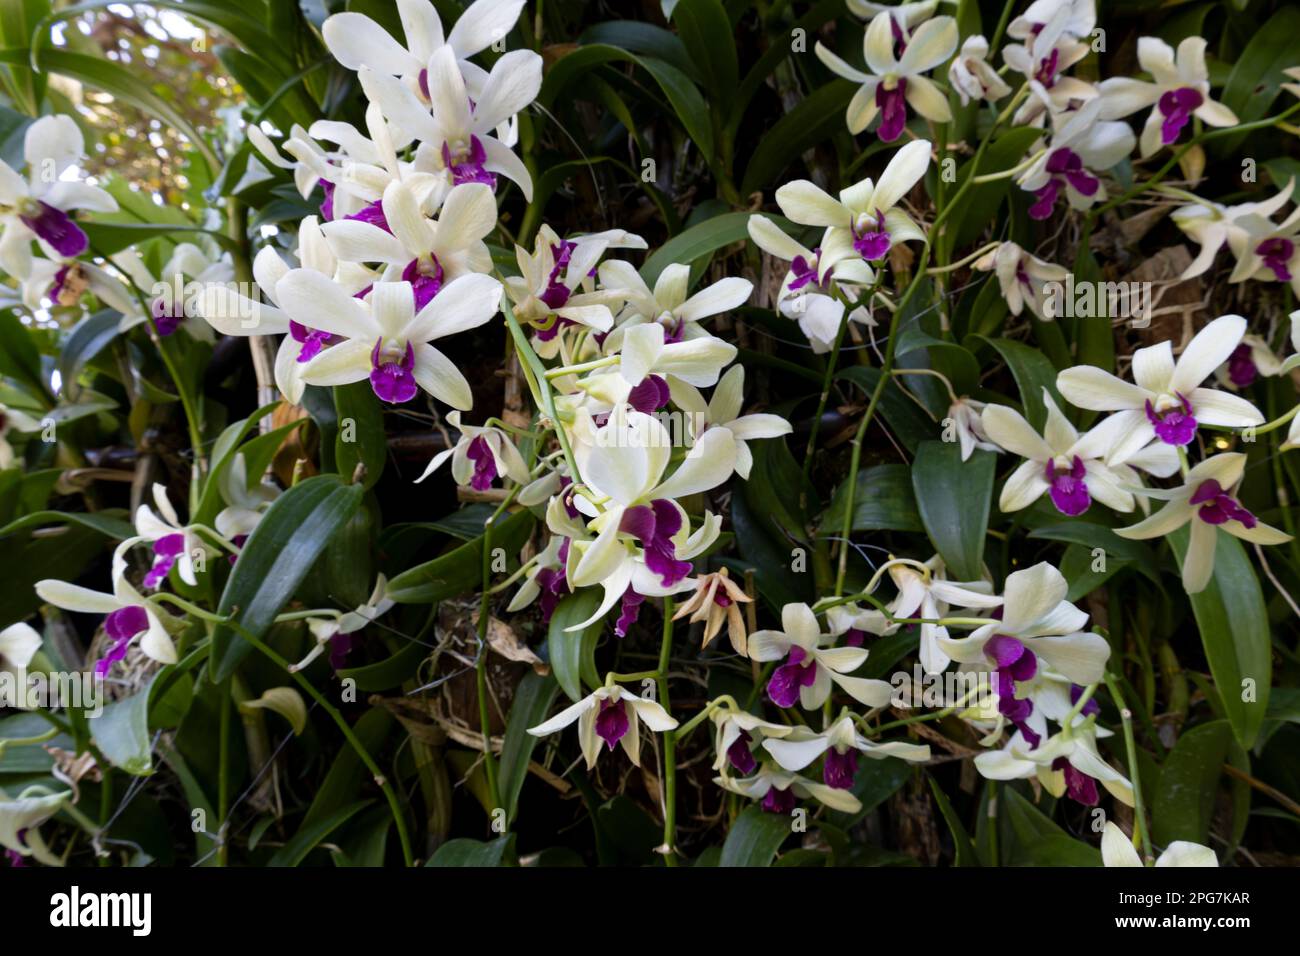 Purple and white orchid flower, The Dendrobium noble, a specie of orchid commonly known as the nobile dendrobium Stock Photo